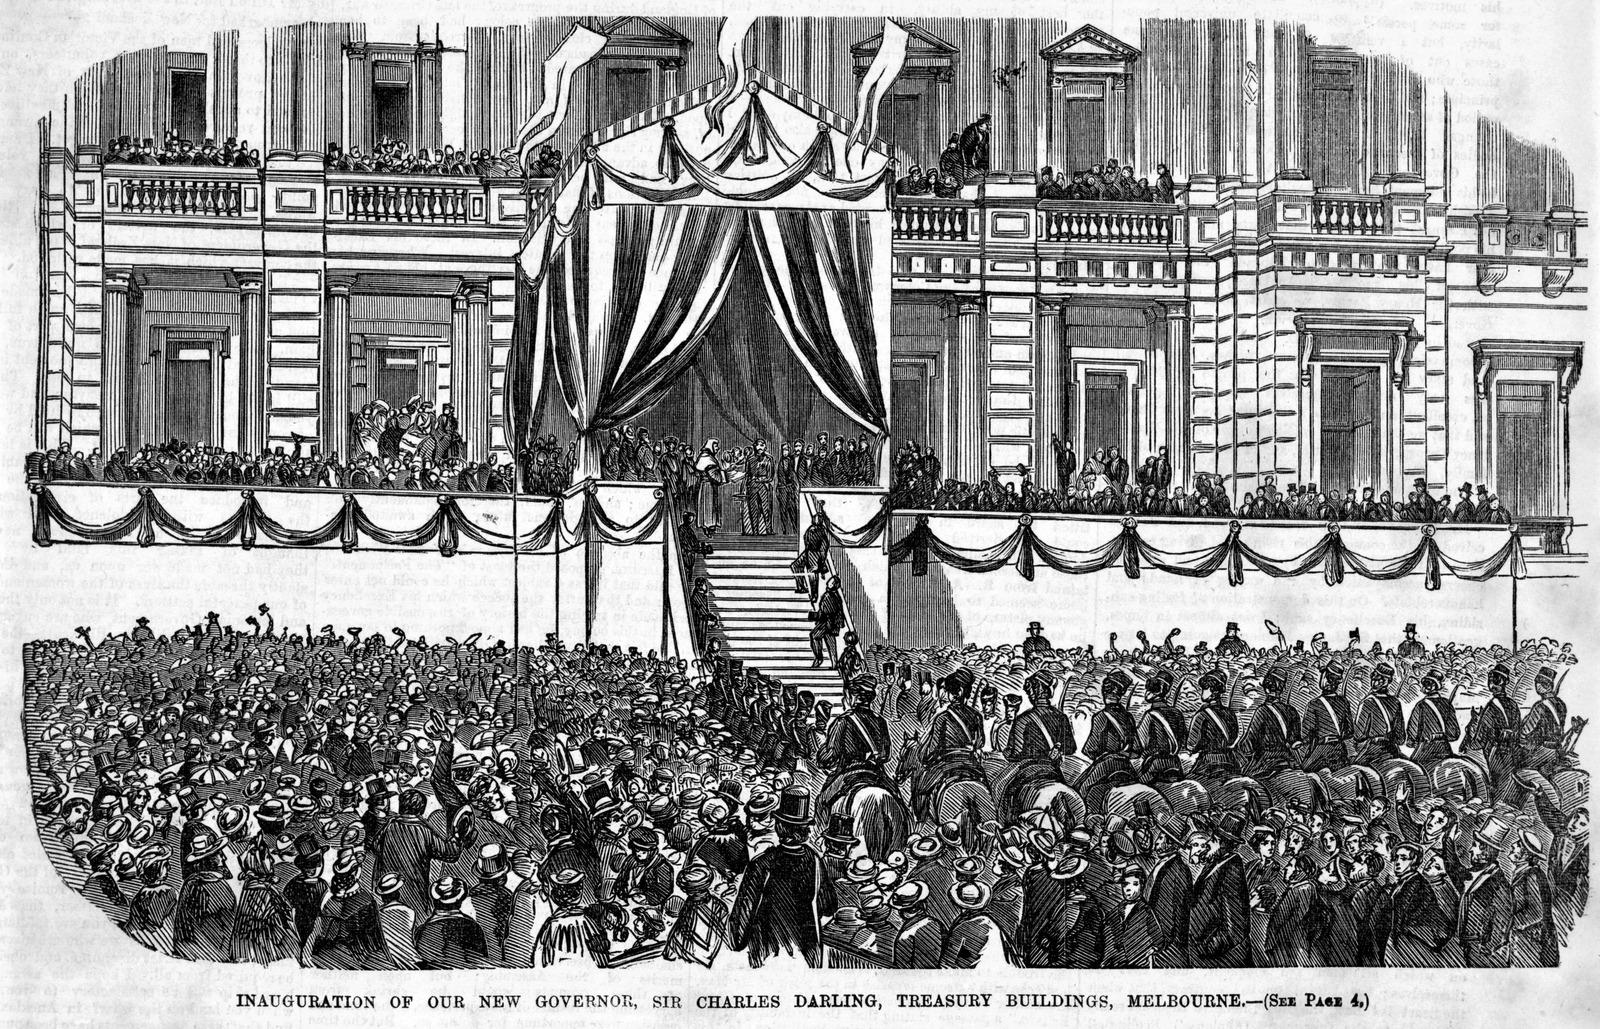 Newspaper print of the Inauguration of Sir Charles Darling as Governor of Victoria at the Treasury Buildings.